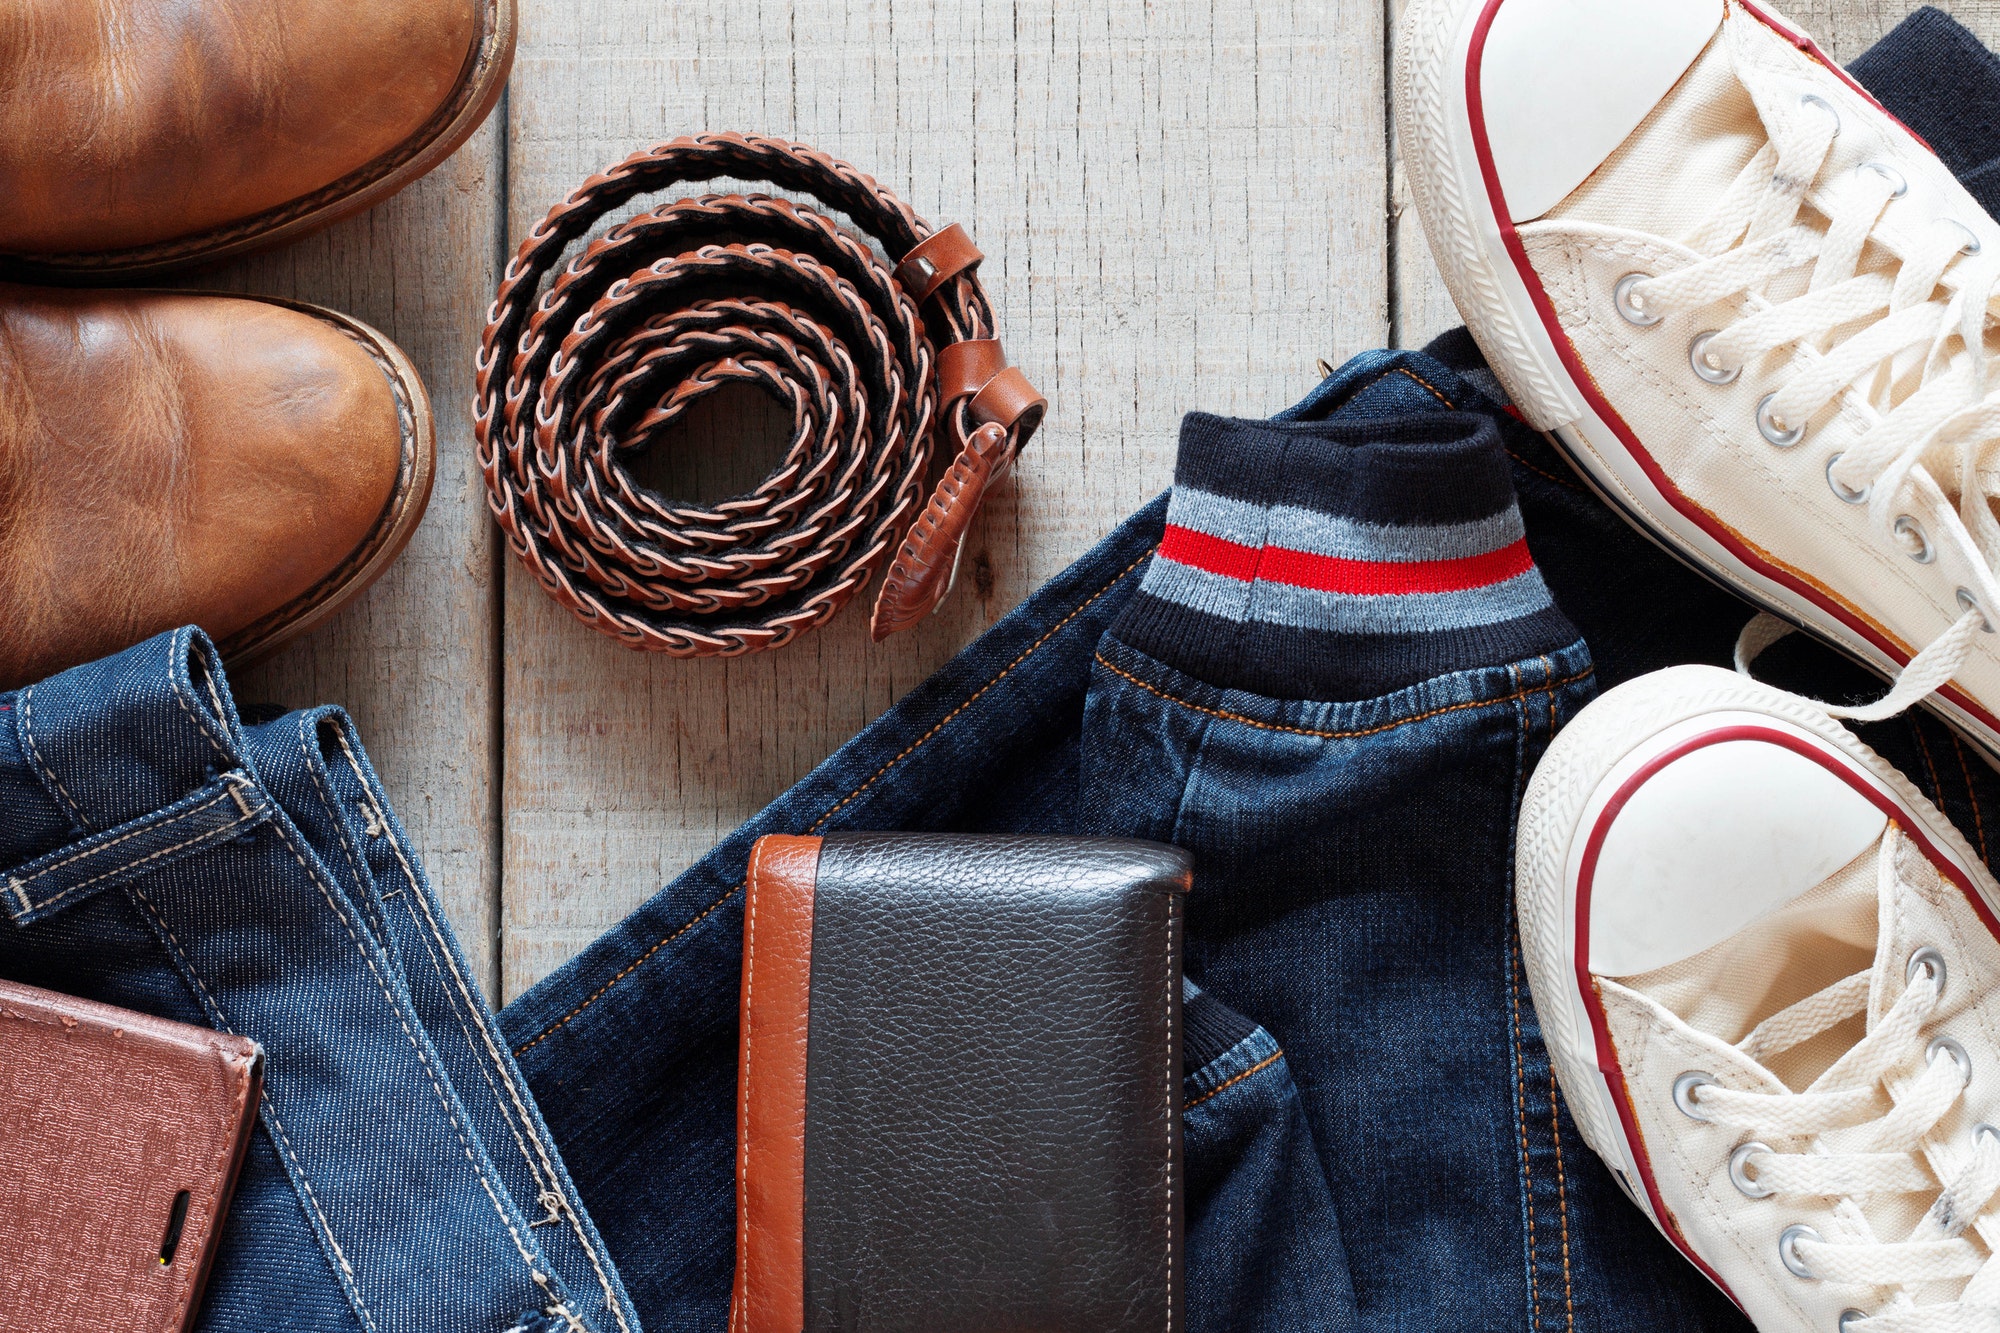 Clothes and accessories on wooden